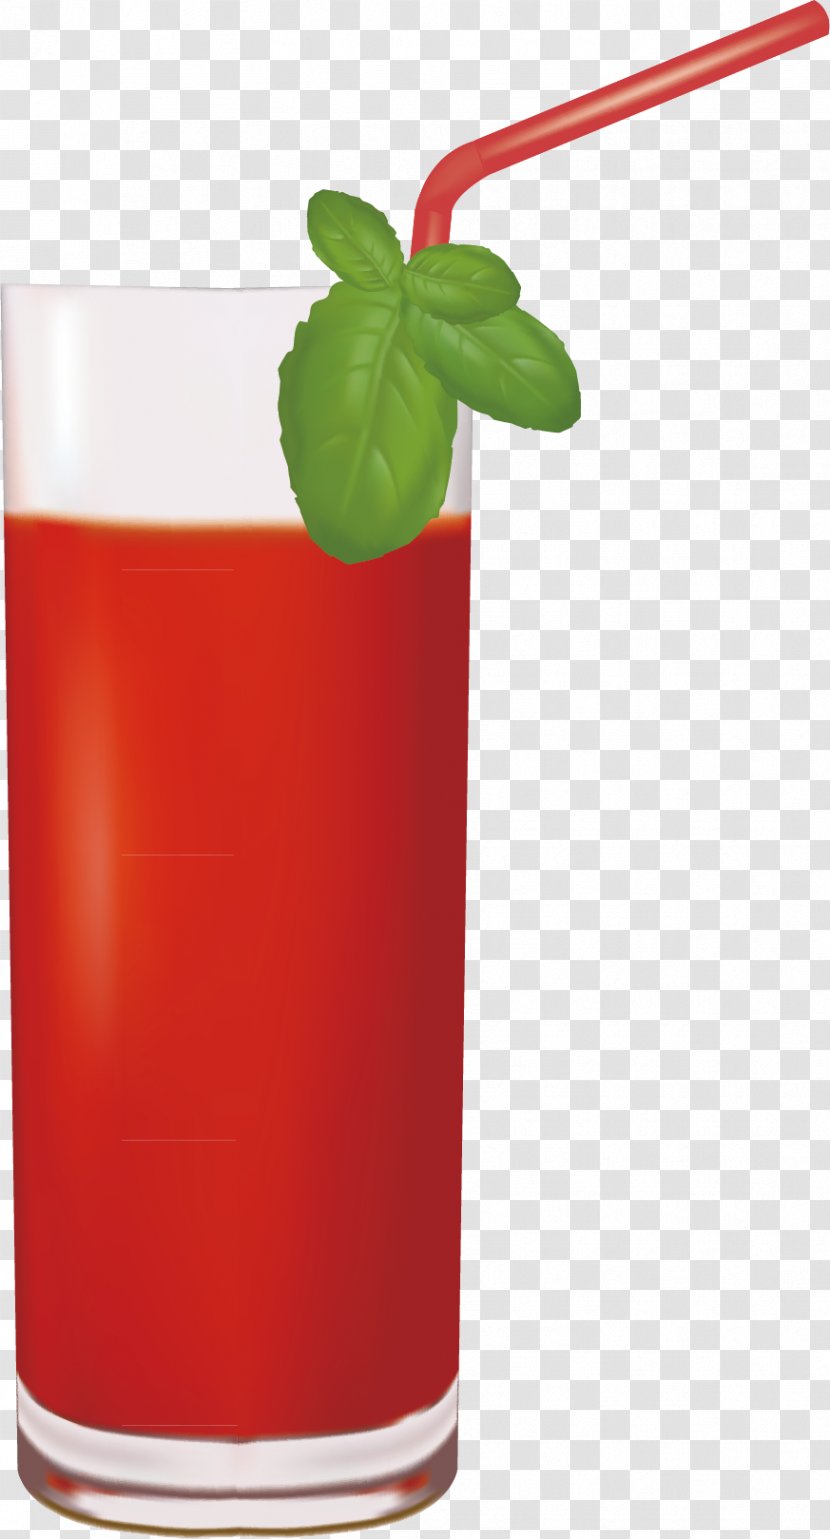 Bloody Mary Cocktail Mojito Tequila Sunrise Screwdriver - Fruit Juice Material Transparent PNG